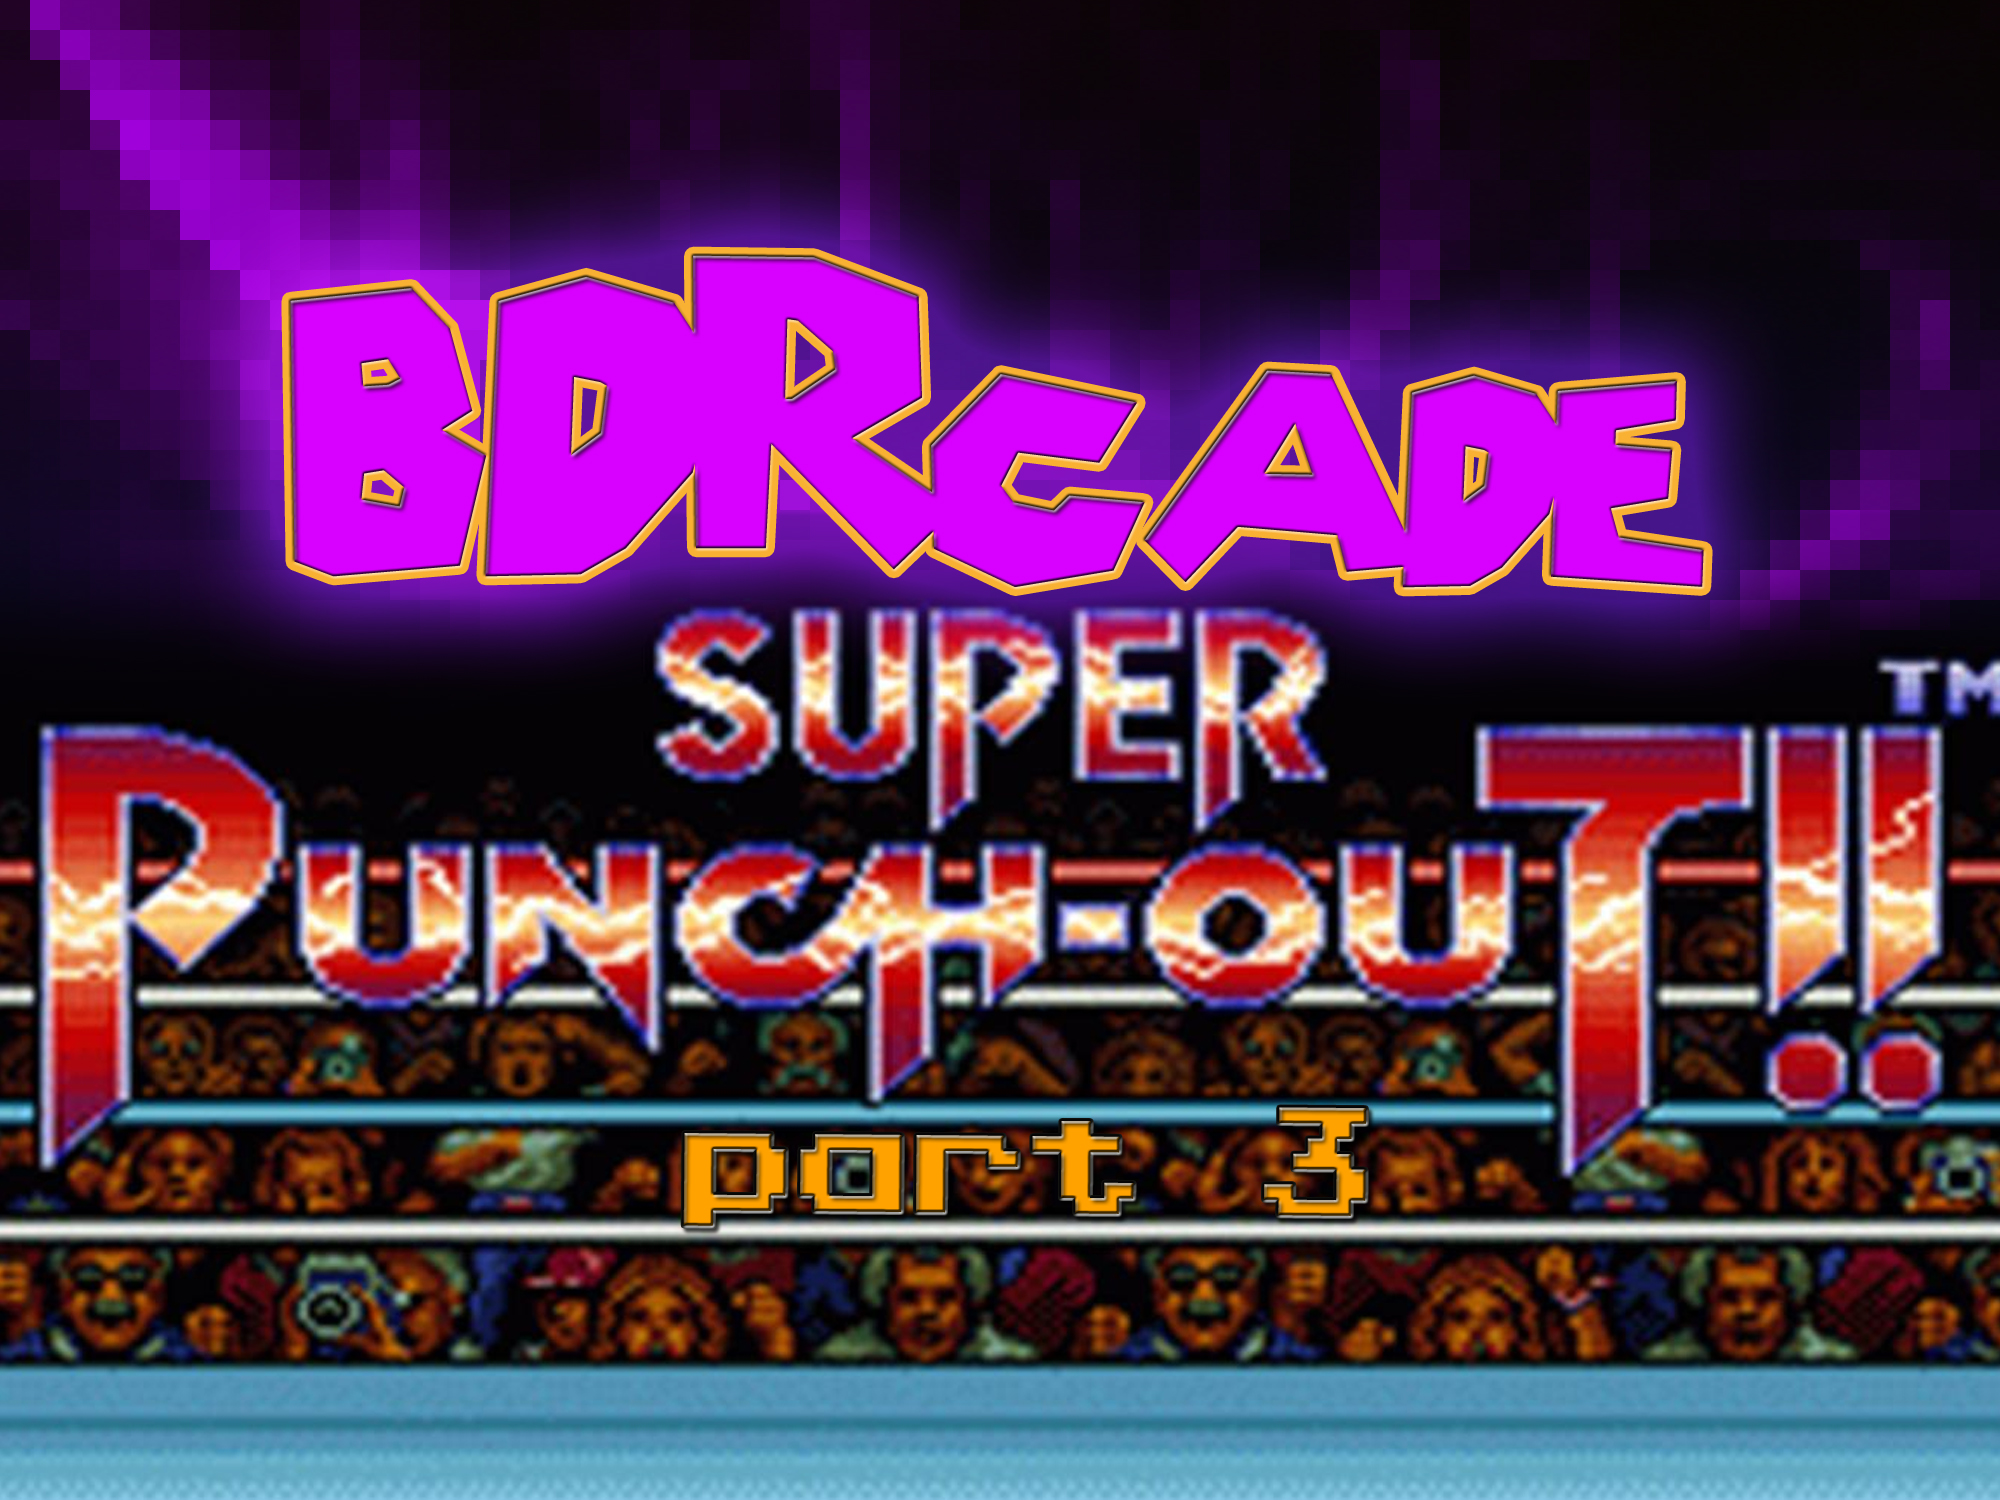 Super Punch-Out: We’re Older Than Him Too?!? – PART 3 – BDRcade